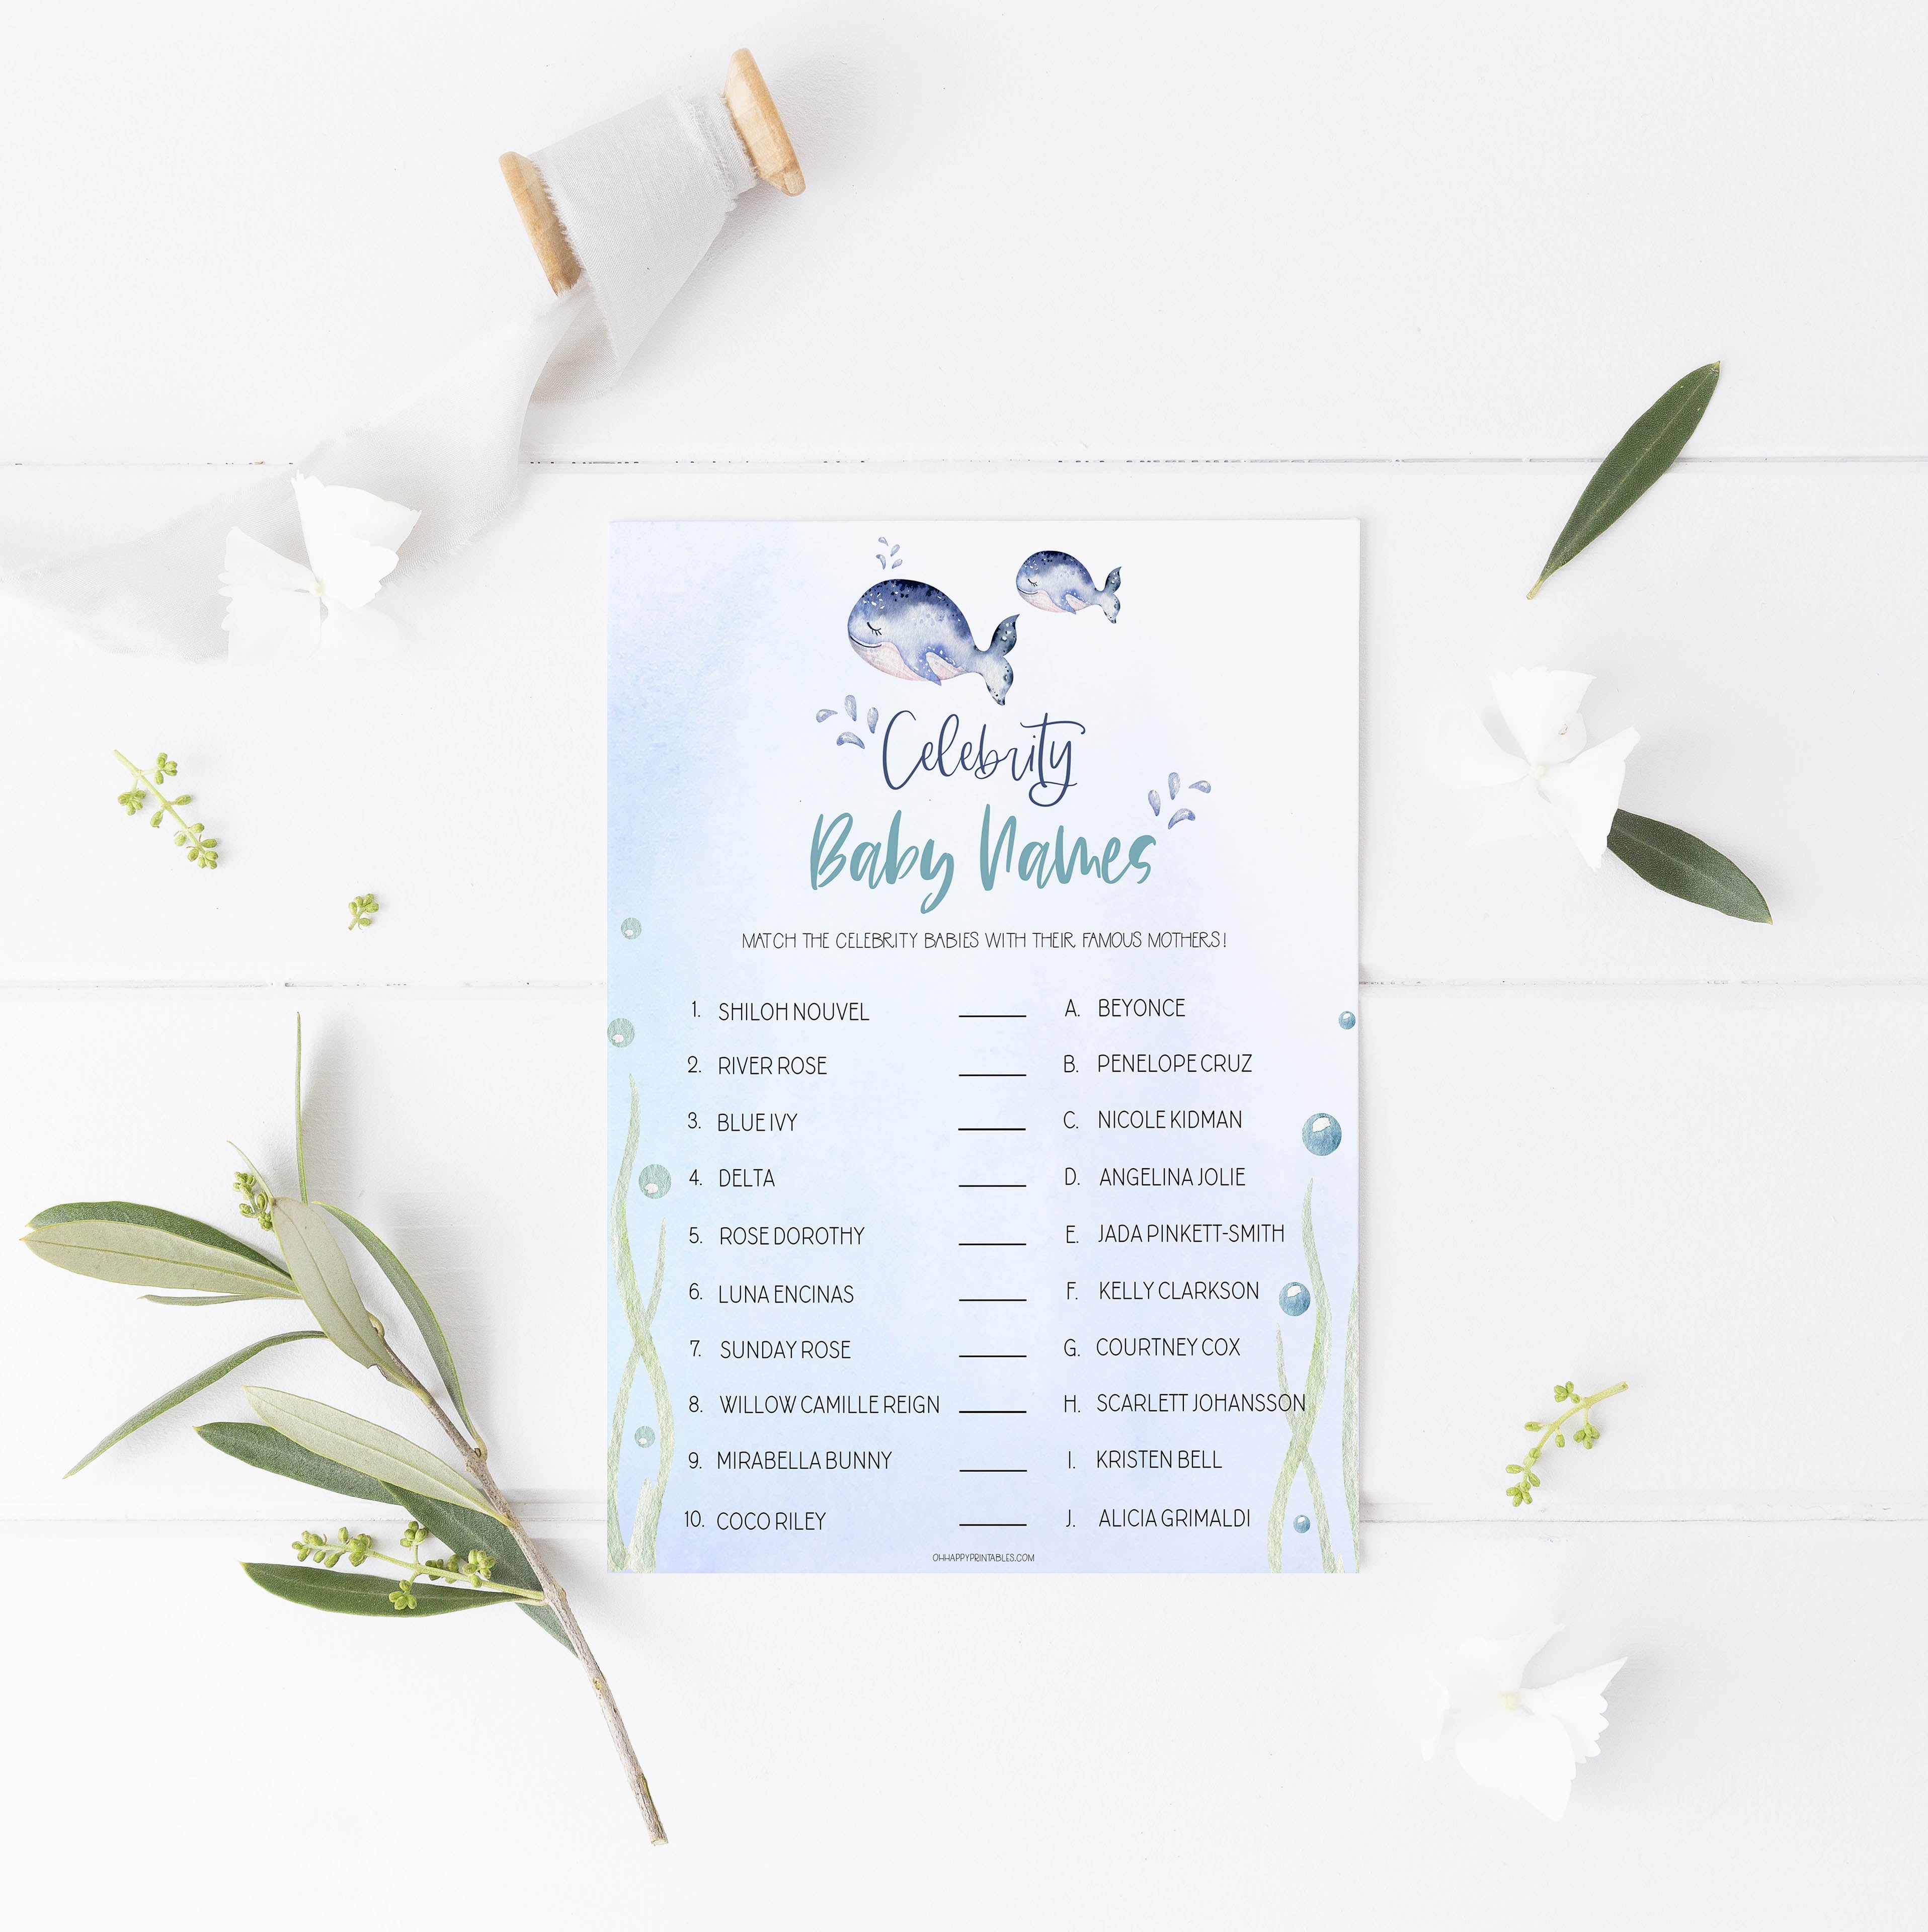 celebrity baby names game, Printable baby shower games, whale baby games, baby shower games, fun baby shower ideas, top baby shower ideas, whale baby shower, baby shower games, fun whale baby shower ideas